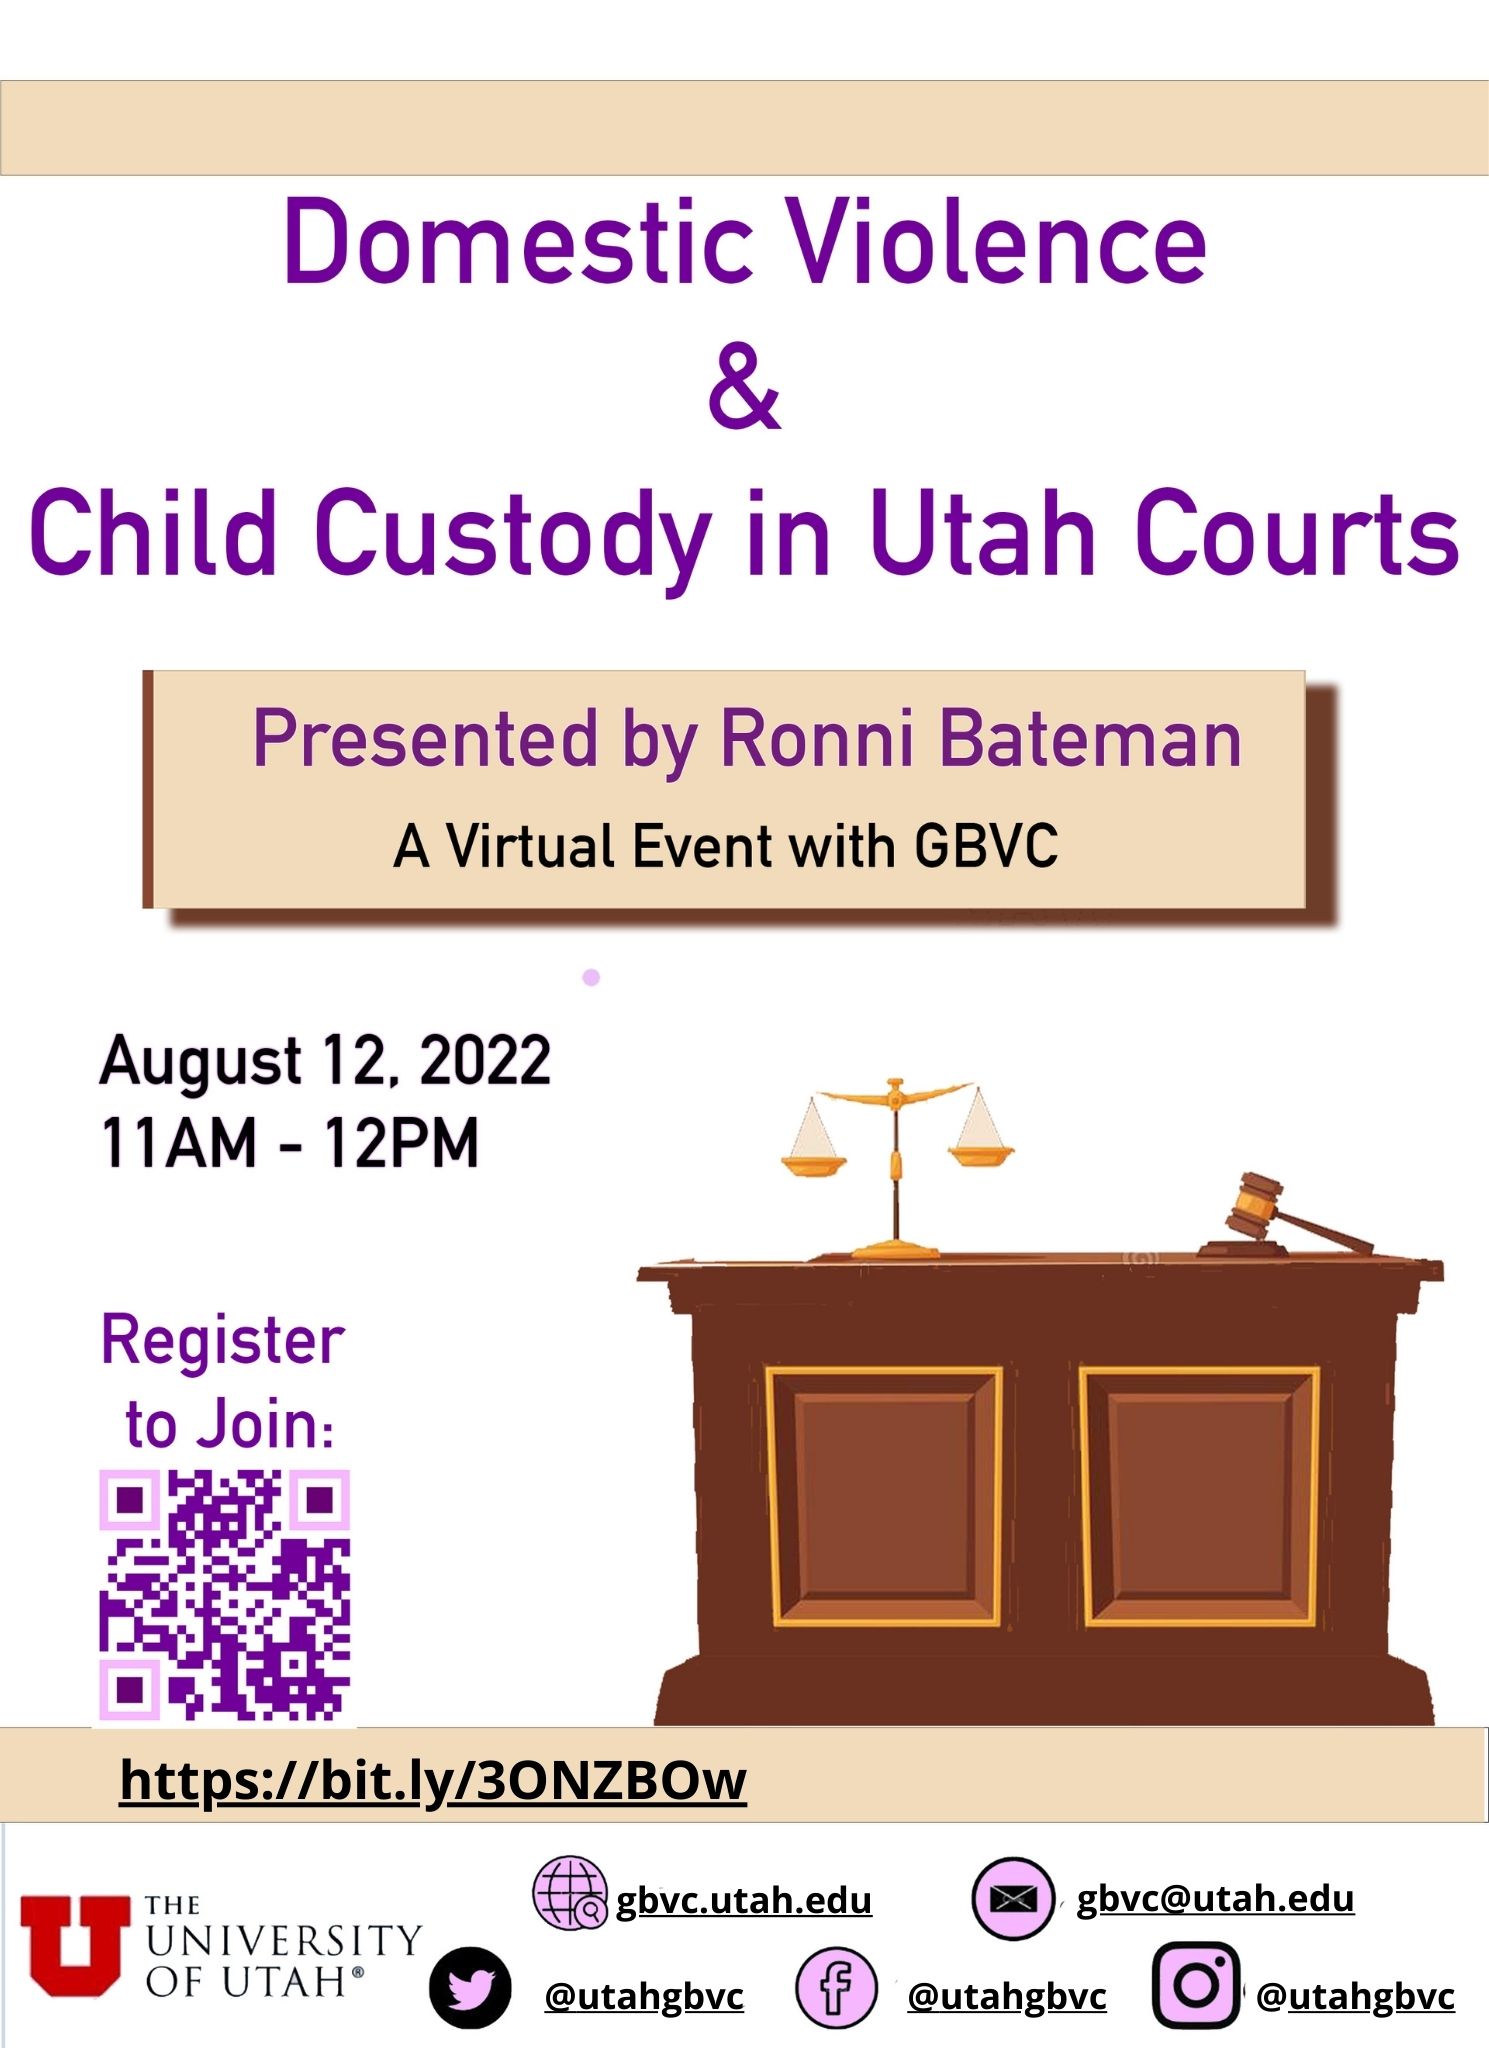 Domestic Violence & Child Custody in Utah Courts. Presented by Ronni Bateman. August 12, 2022 11AM - 12PM. Register https://bit.ly/3ONZBOw